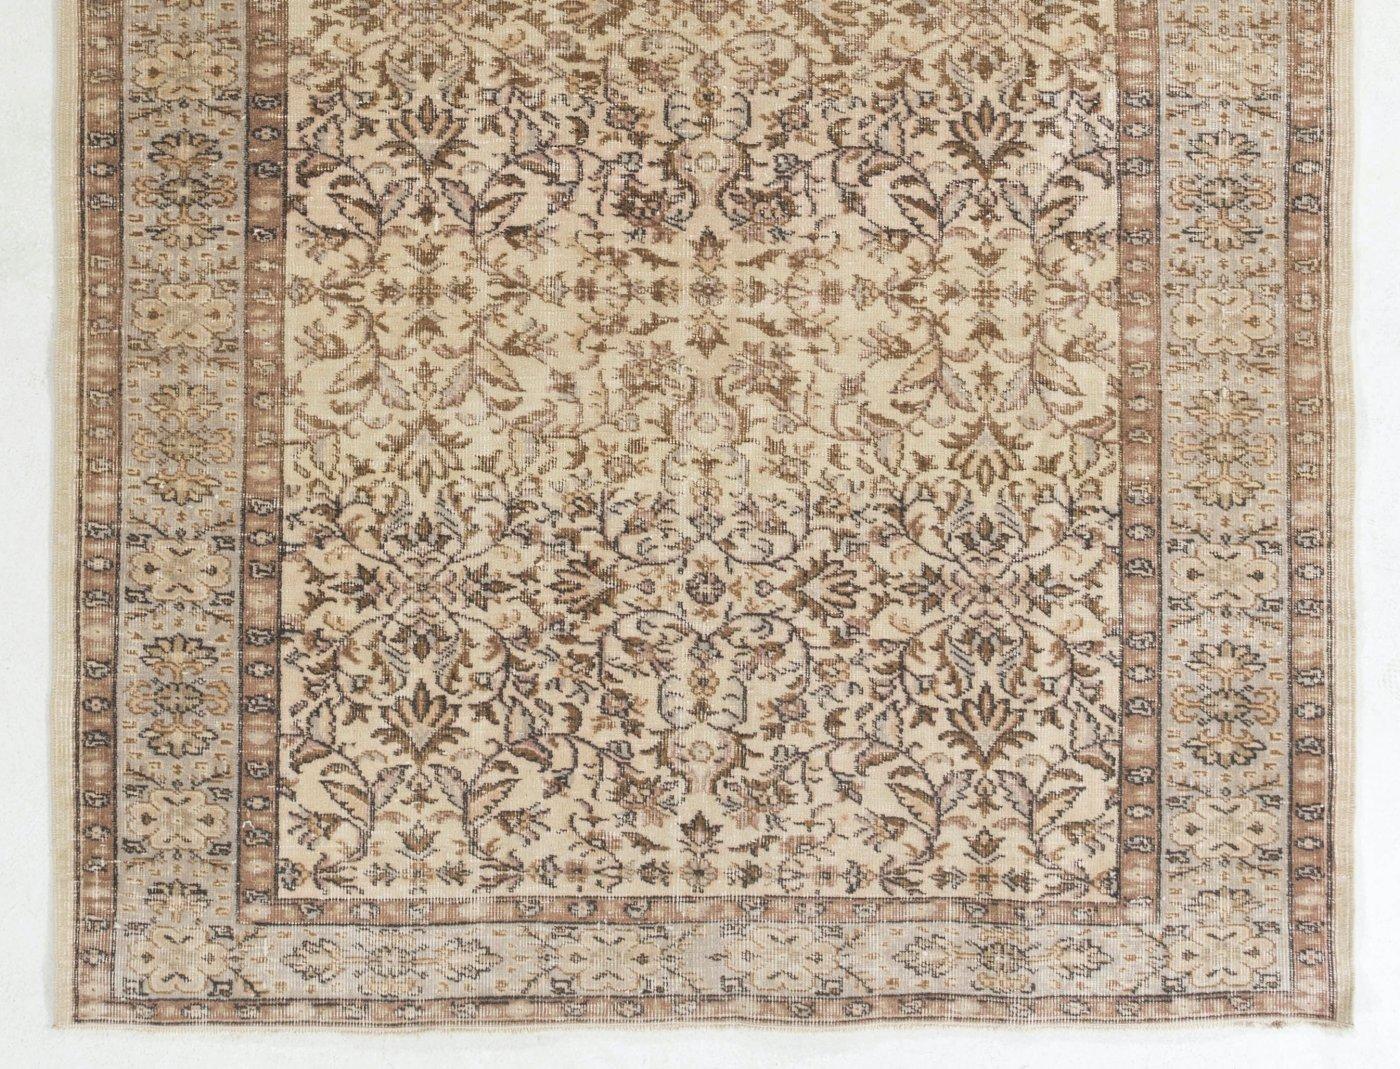 Hand-Woven 5.6x8.8 Ft Mid Century Vintage Handmade Turkish Oushak Rug with Floral Design For Sale